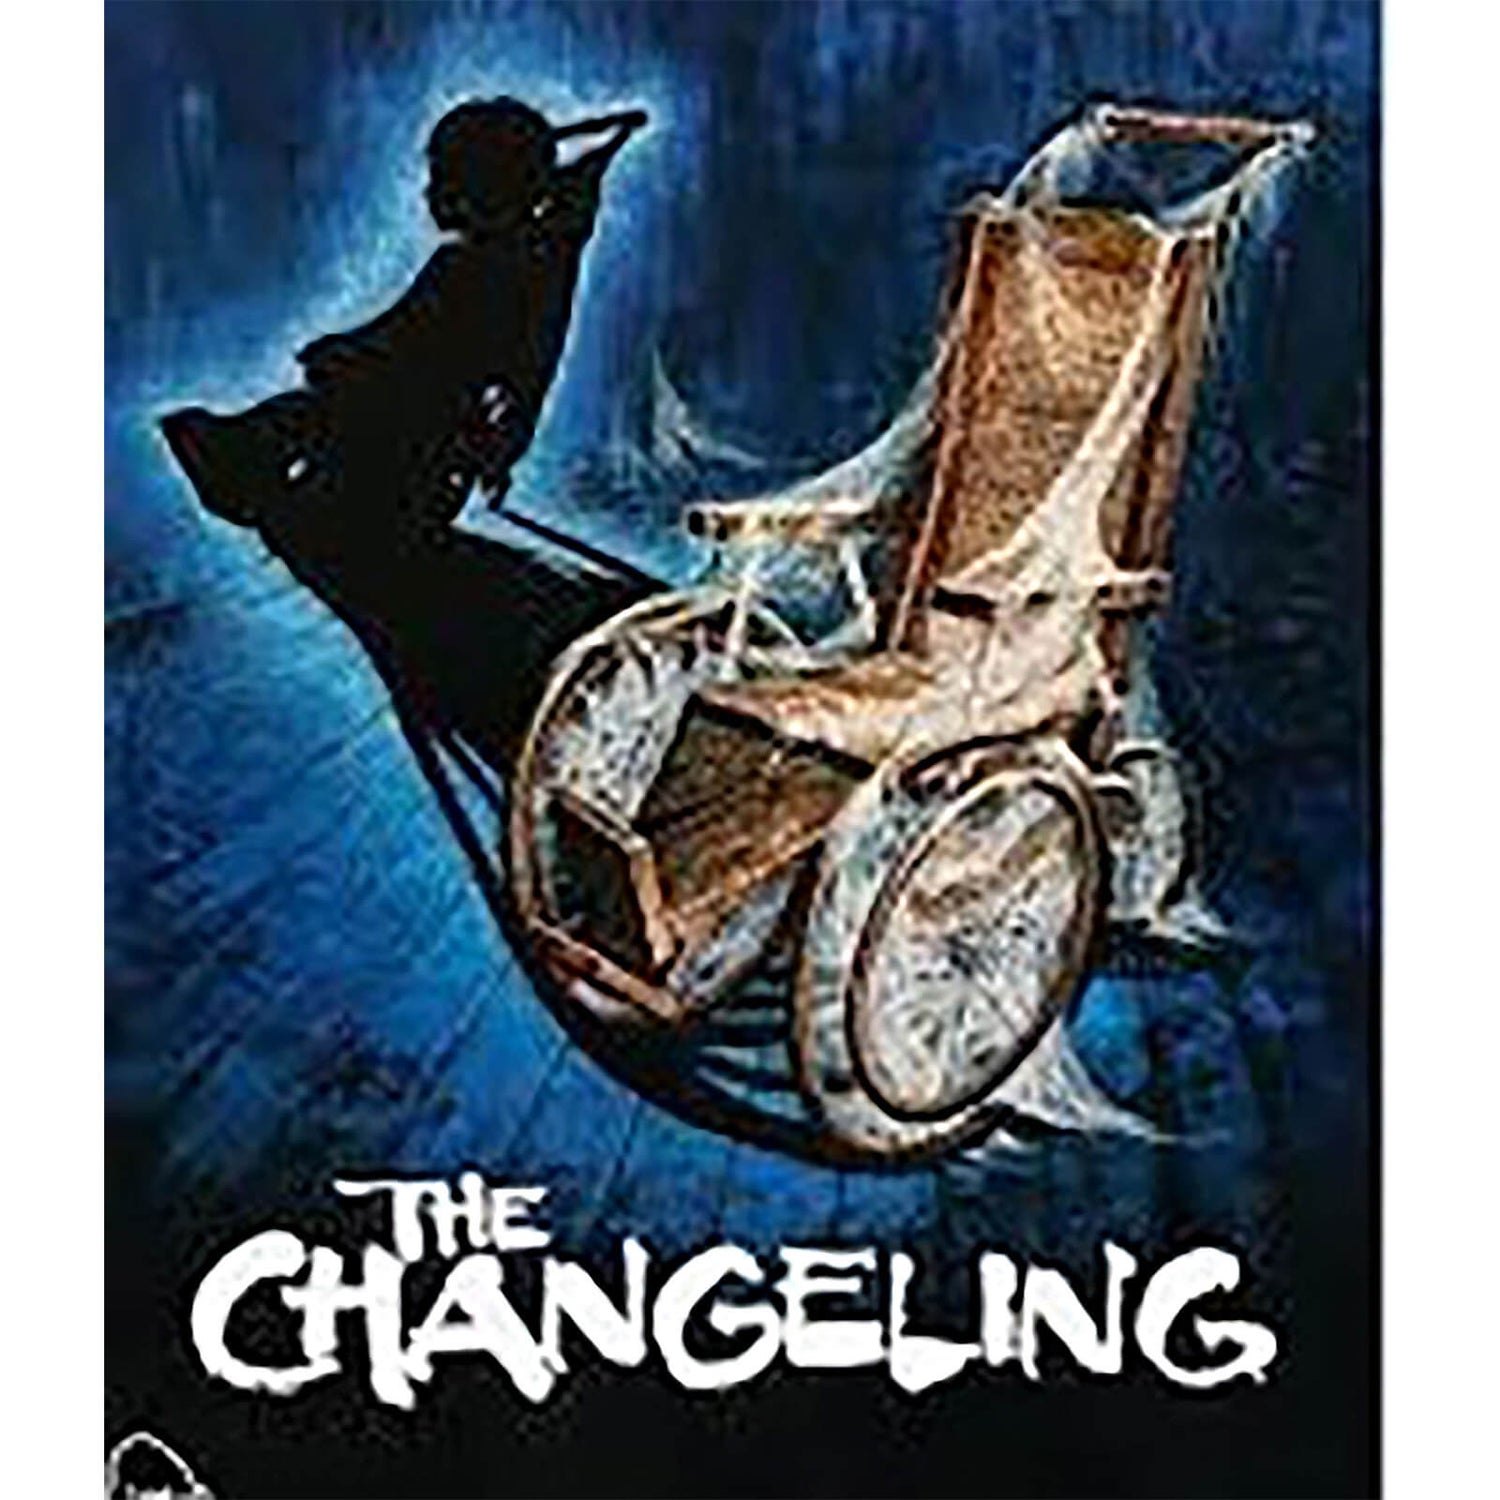 The Changeling - Limited Edition